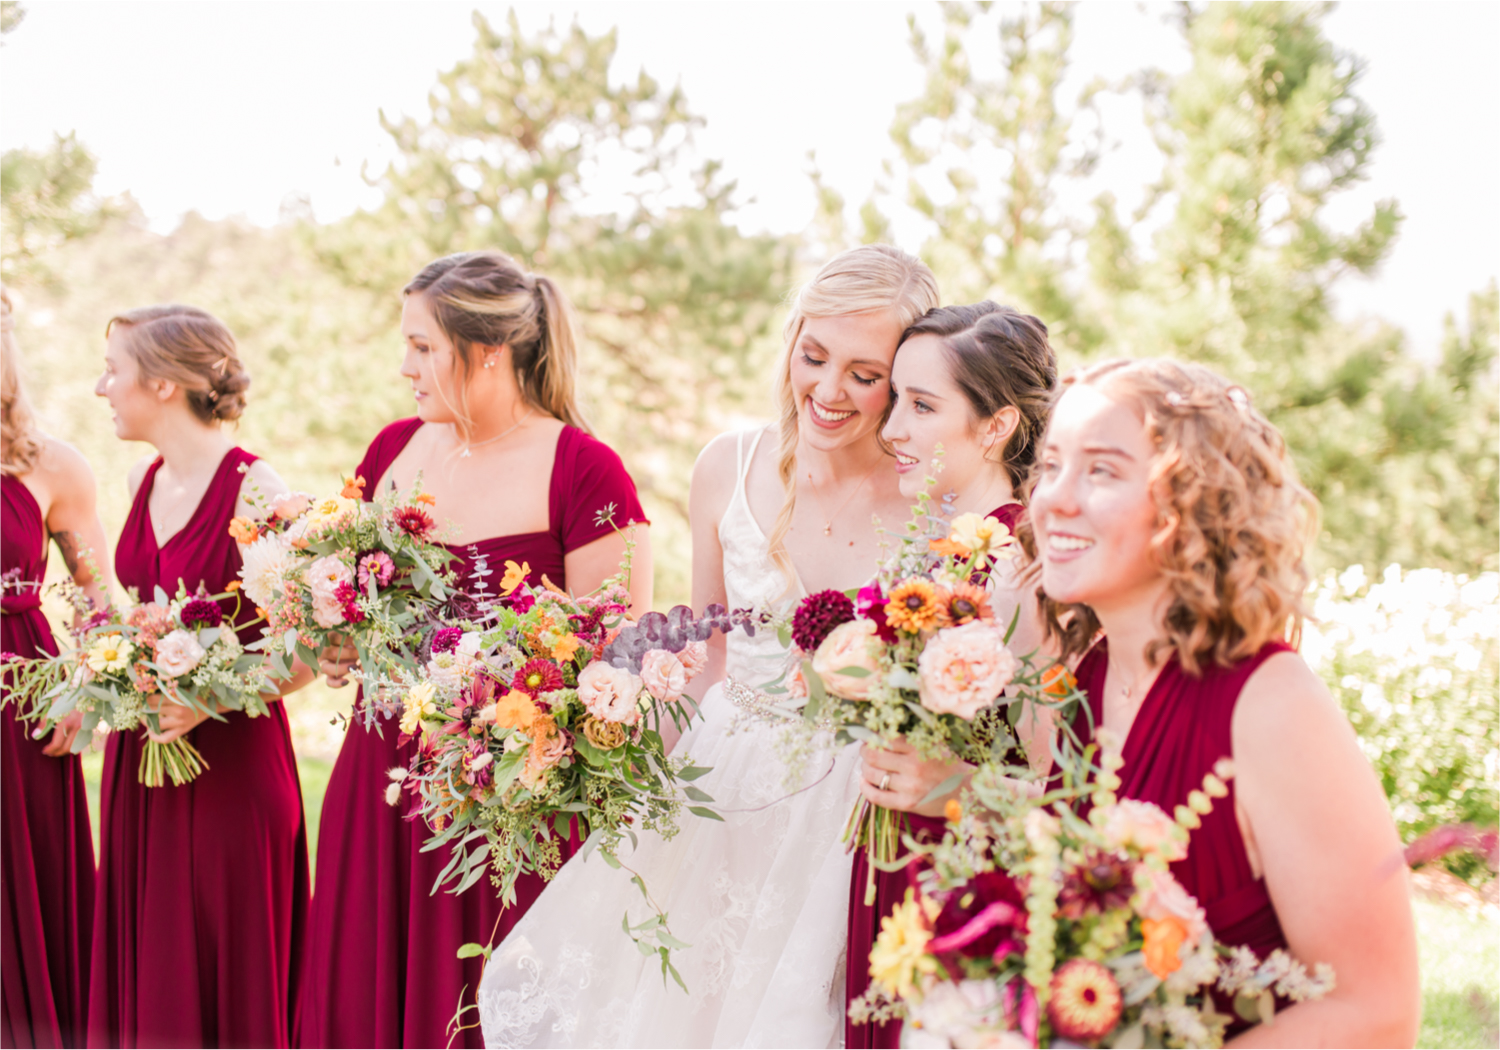 Romantic Whimsical Wedding at the Lionscrest Manor in Lyons, CO | Britni Girard Photography - Wedding Photo and Video Team | Rustic Fall Decor mixed in Burgundy, Blush, Gold and Sage | Wedding Dress from Anna Be Bridal by Hailey Paige | Hair and Makeup by Glam 5280 Chaundra Revier | Bride and Bridesmaids | Florals by Aflorae